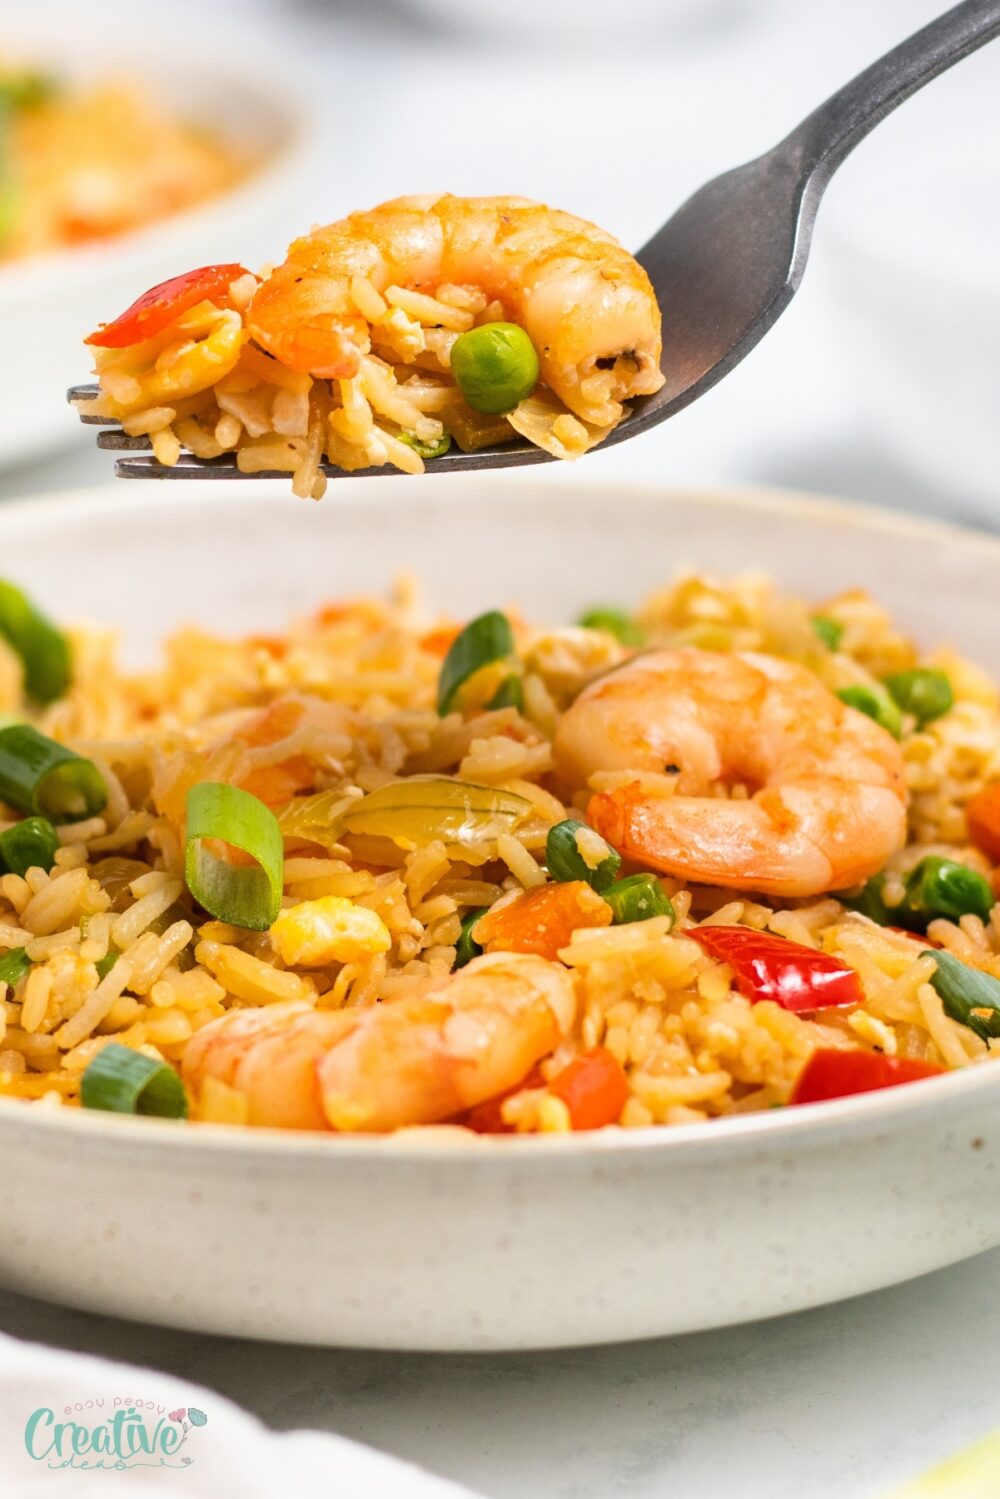 Craving a scrumptious meal? Look no further! This easy shrimp fried rice recipe combines succulent shrimps, crisp veggies, and flavors that will leave you wanting more!